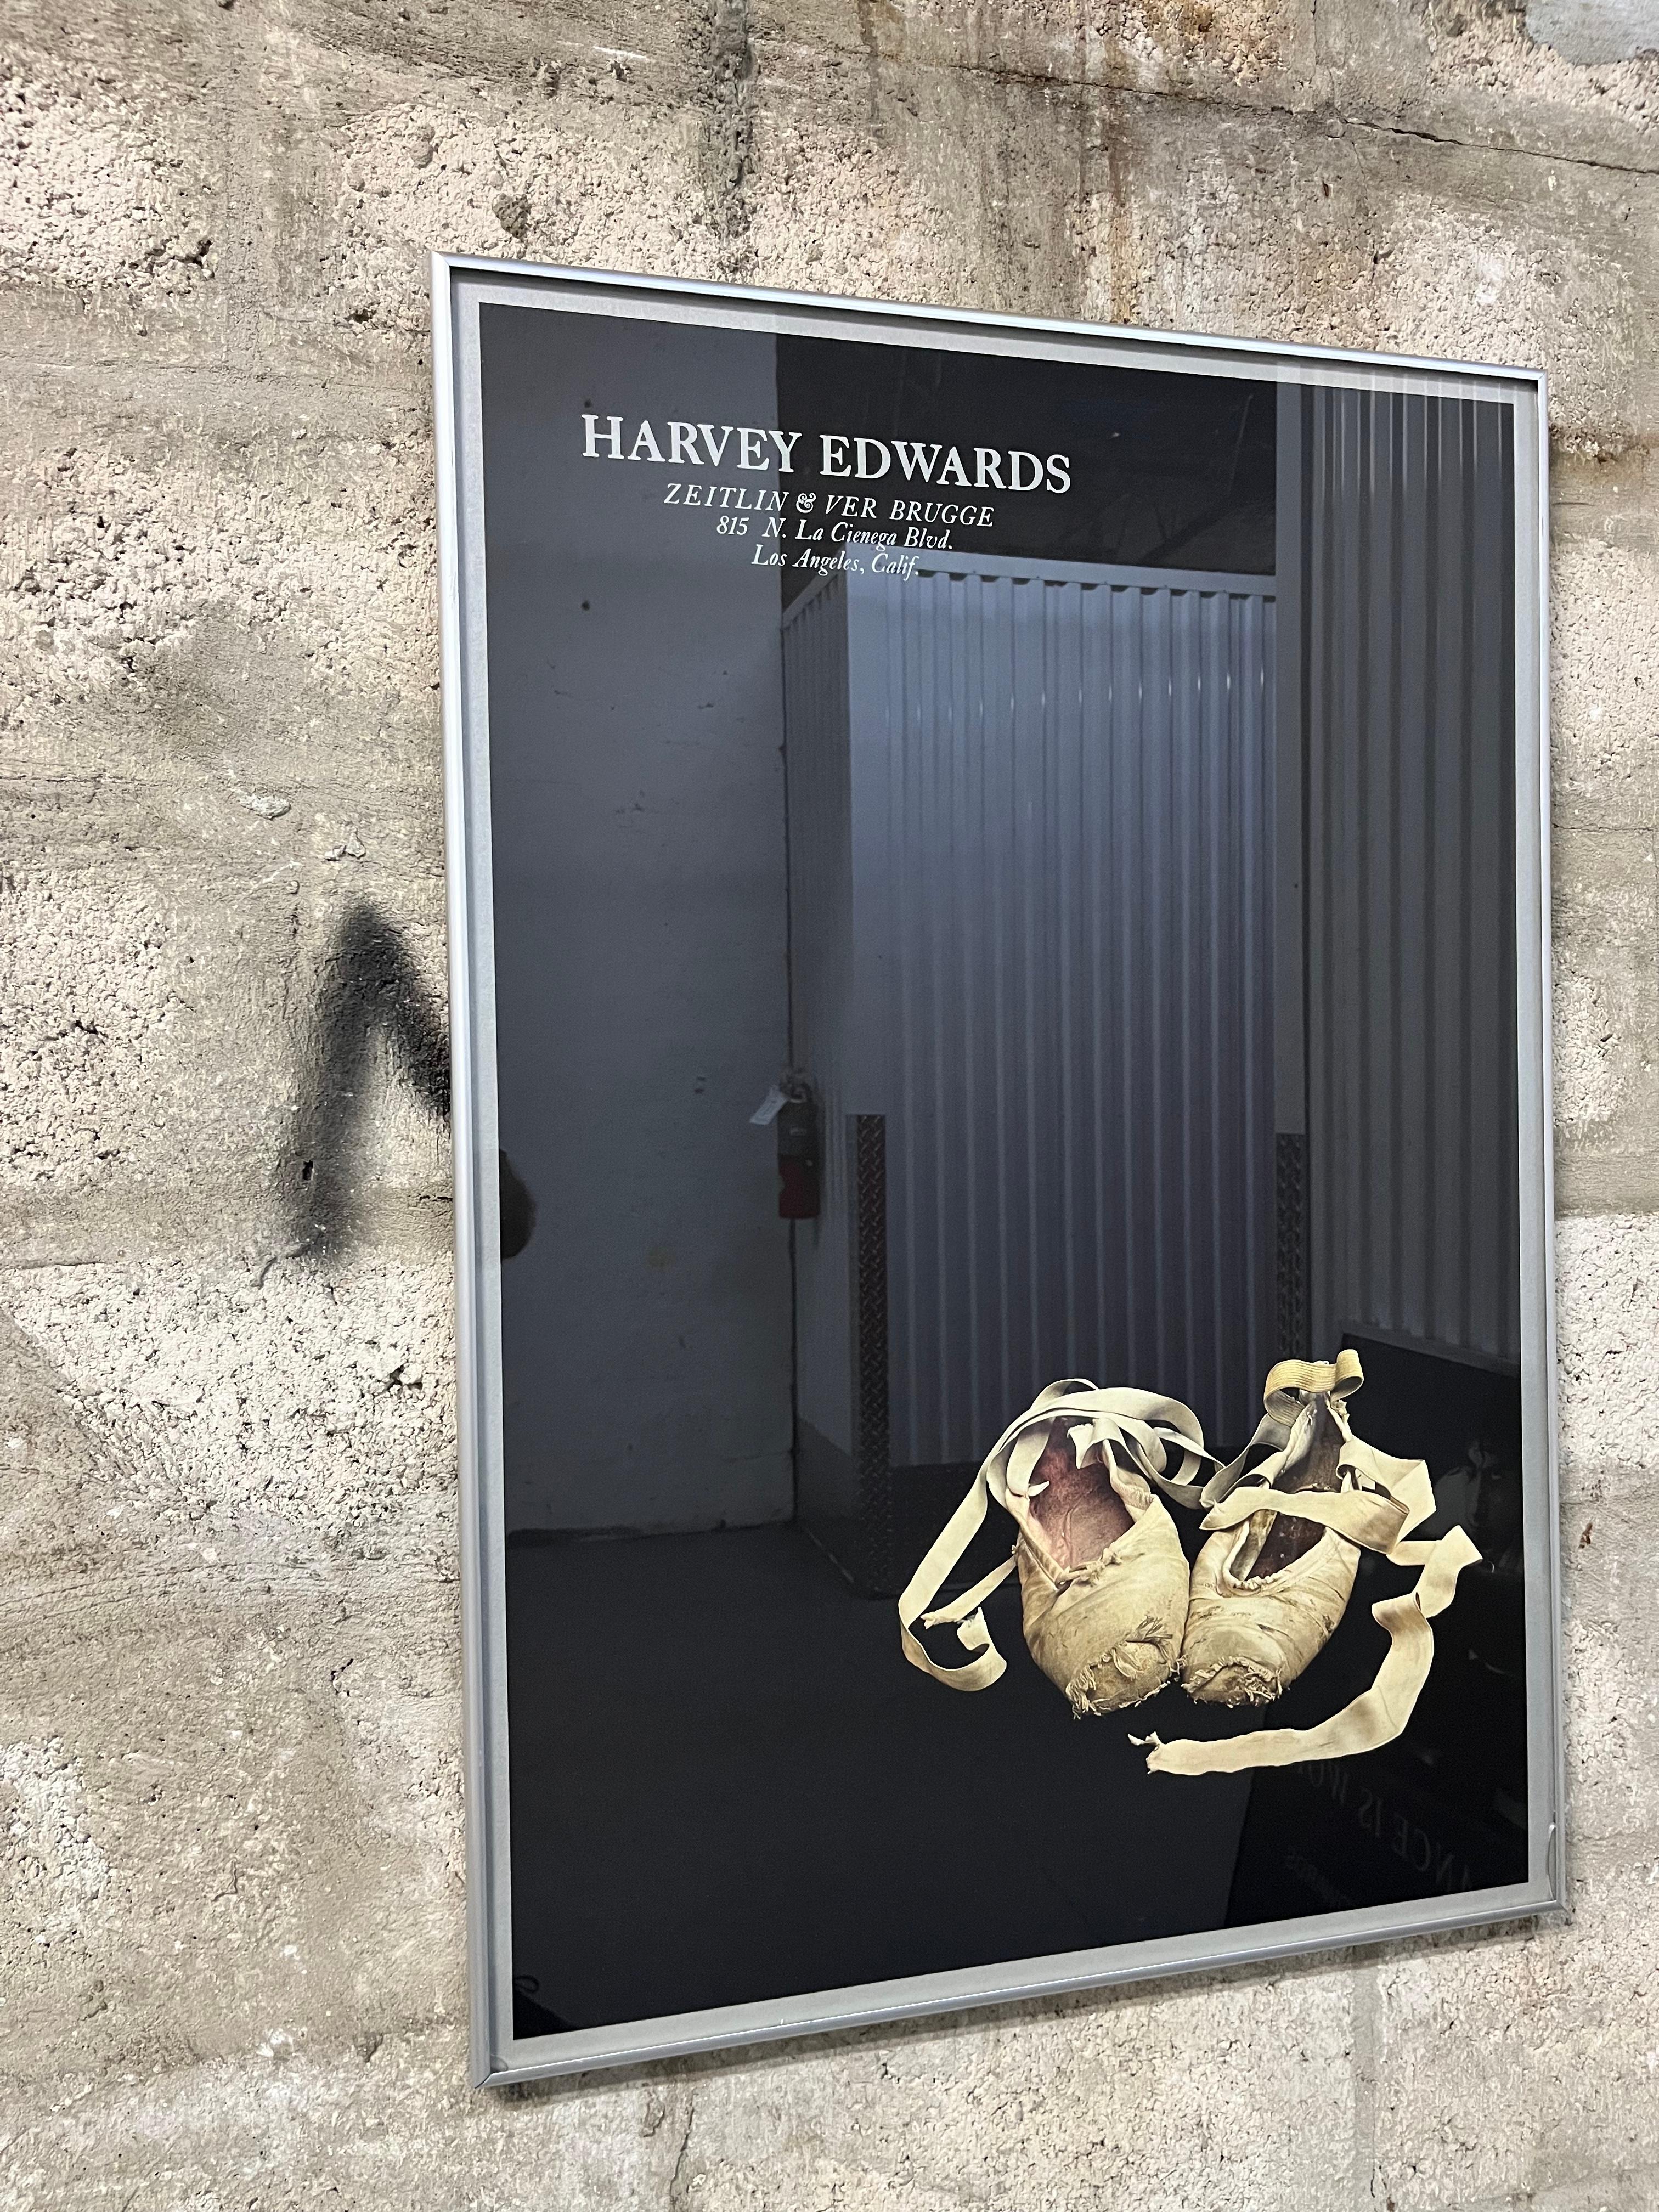 Original Harvey Edwards Zeitlin & Ver Brugge Rare Books Store Framed Exhibition Poster. 1979
Features a monochromatic image of a pair of distressed ballet shoes on a solid black background framed with an aluminum and protected with a glass. 
In good